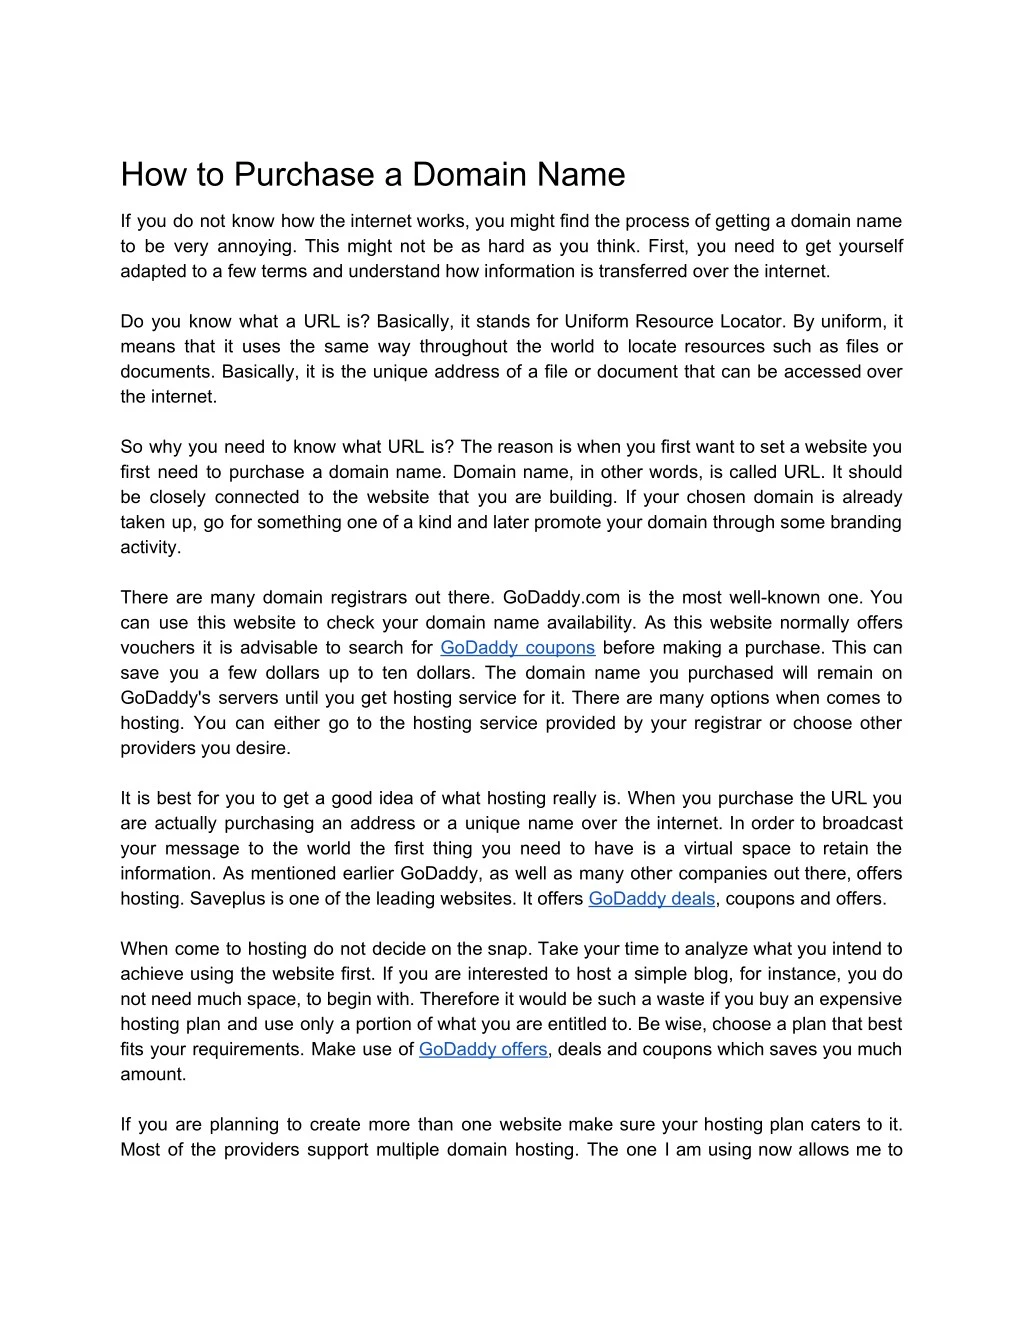 how to purchase a domain name